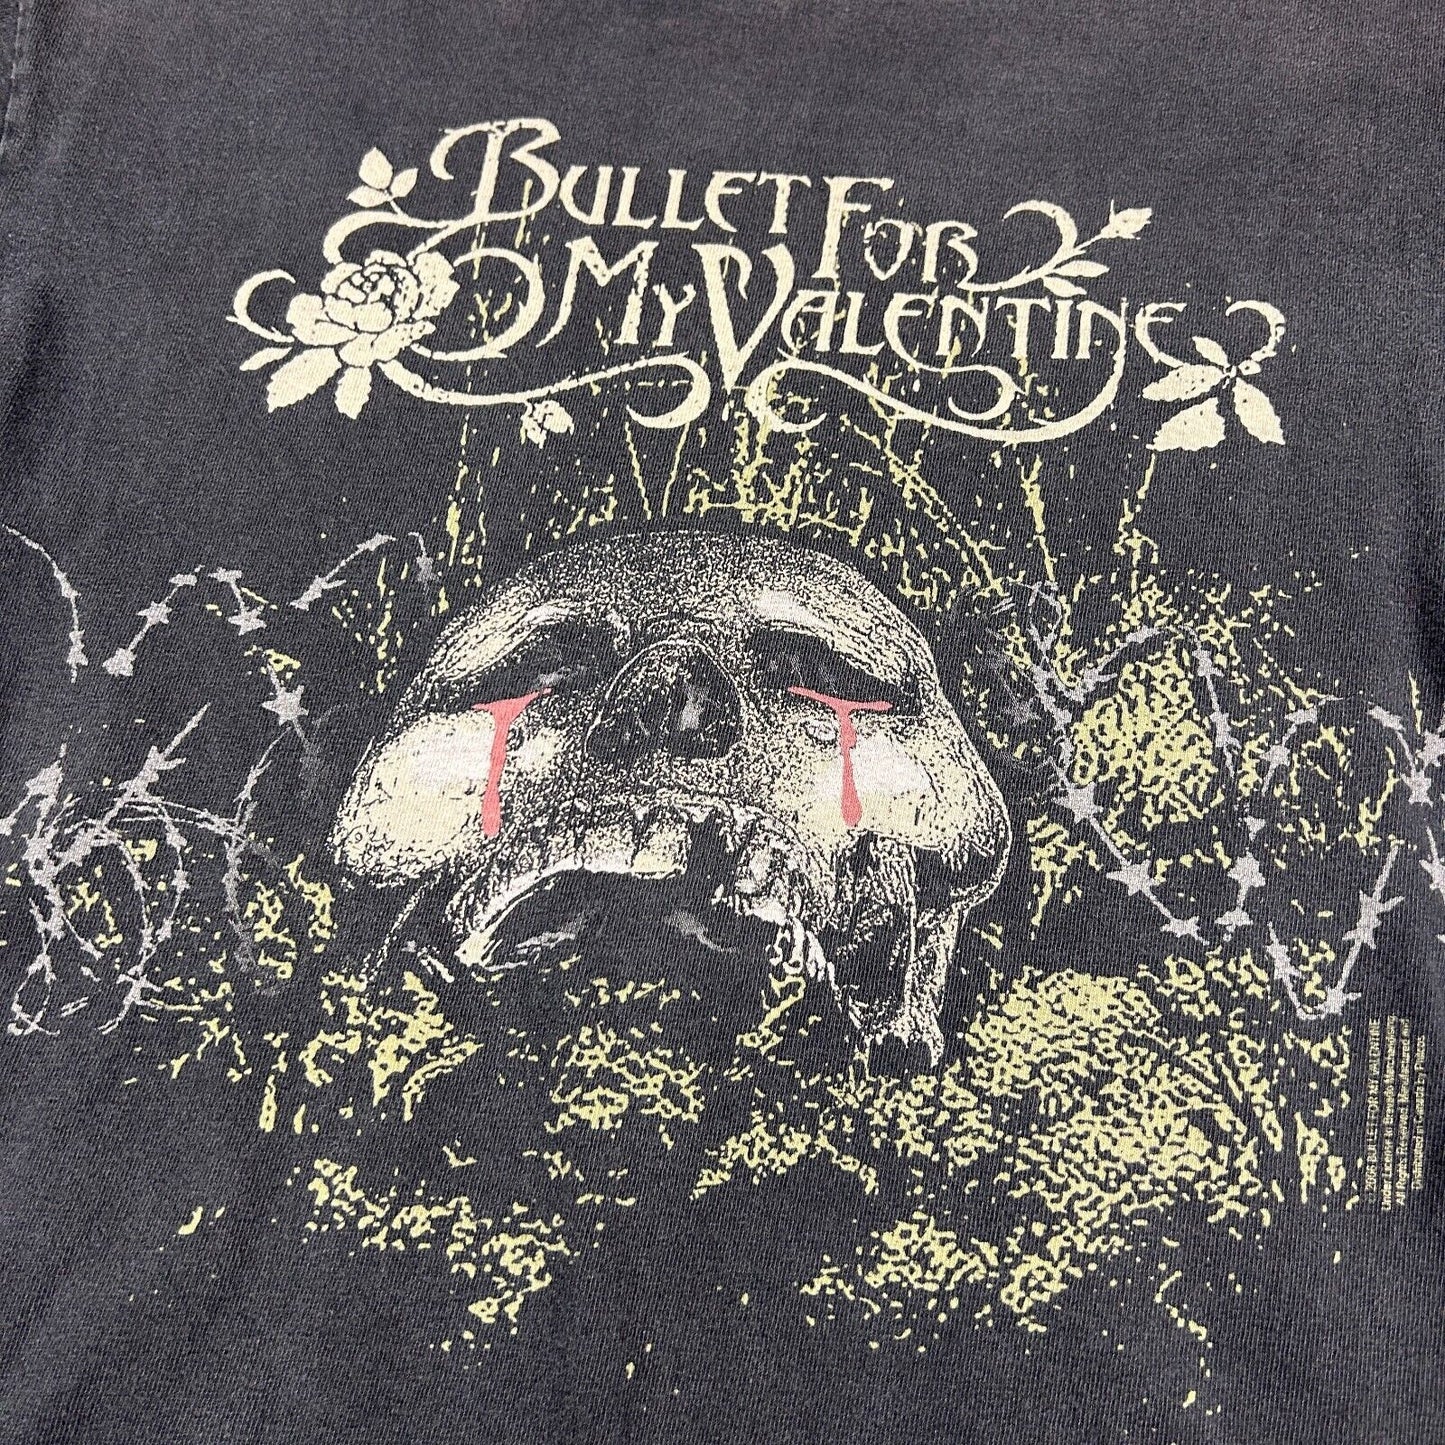 VINTAGE Bullet For My Valentine Black Band T-Shirt sz Small Adult